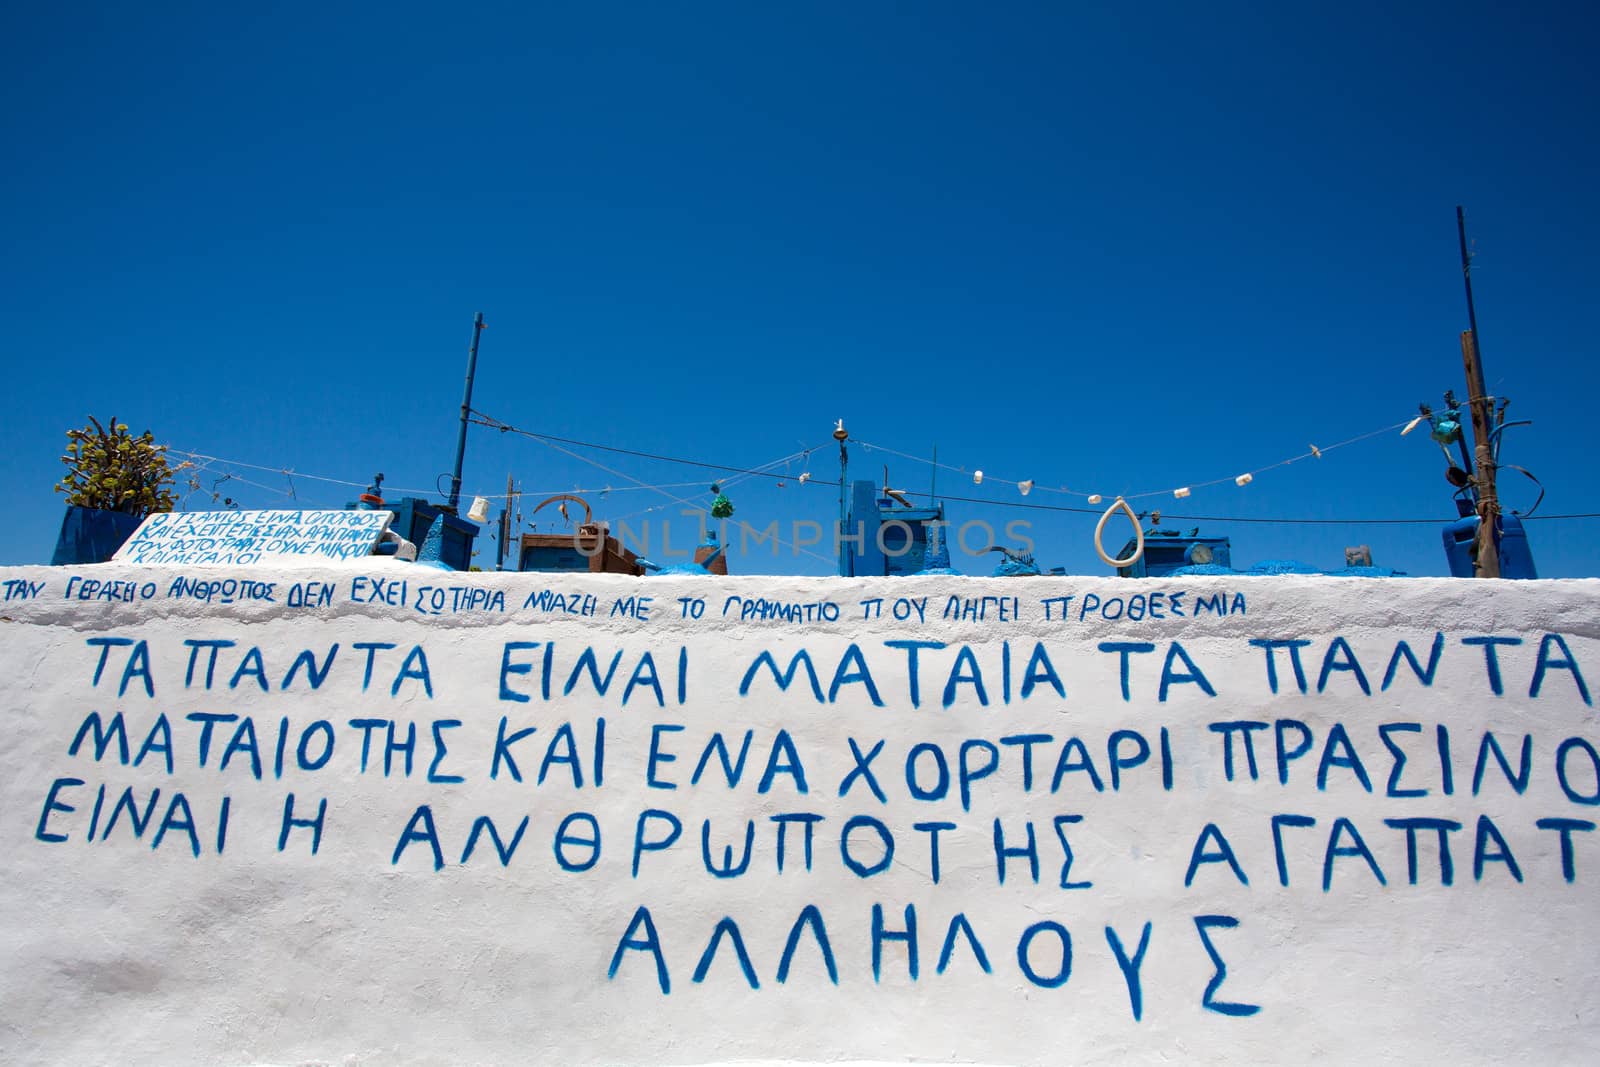 Artistic installation on a  roof of a house in Folegandros, the installation is made of strange objects all painted in blue, There is also a message about the crisis in Greece.